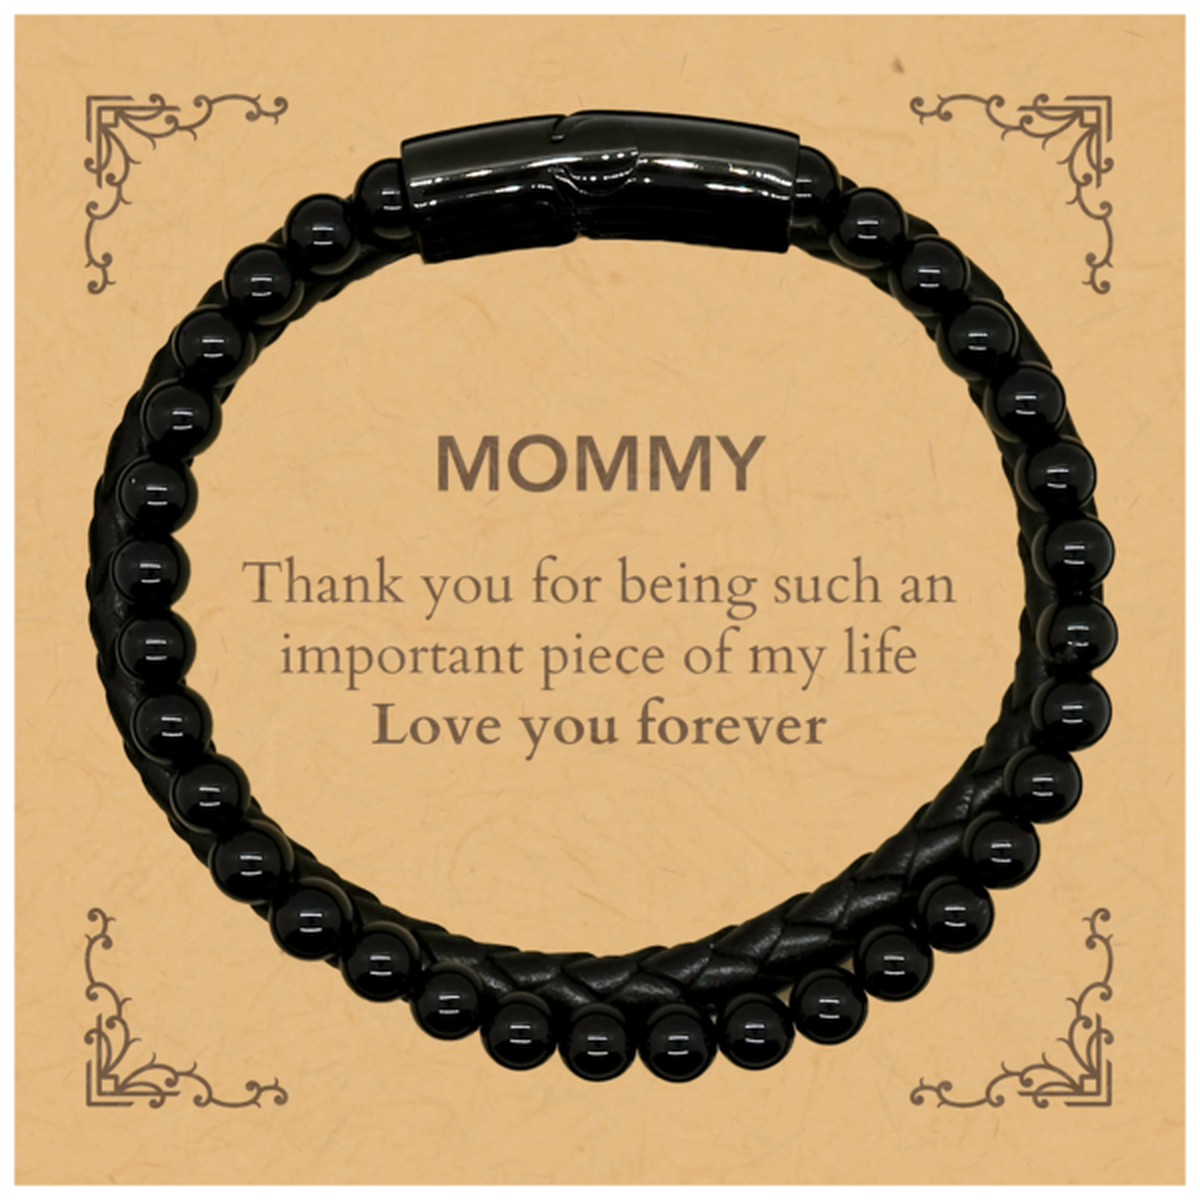 Appropriate Mommy Stone Leather Bracelets Epic Birthday Gifts for Mommy Thank you for being such an important piece of my life Mommy Christmas Mothers Fathers Day